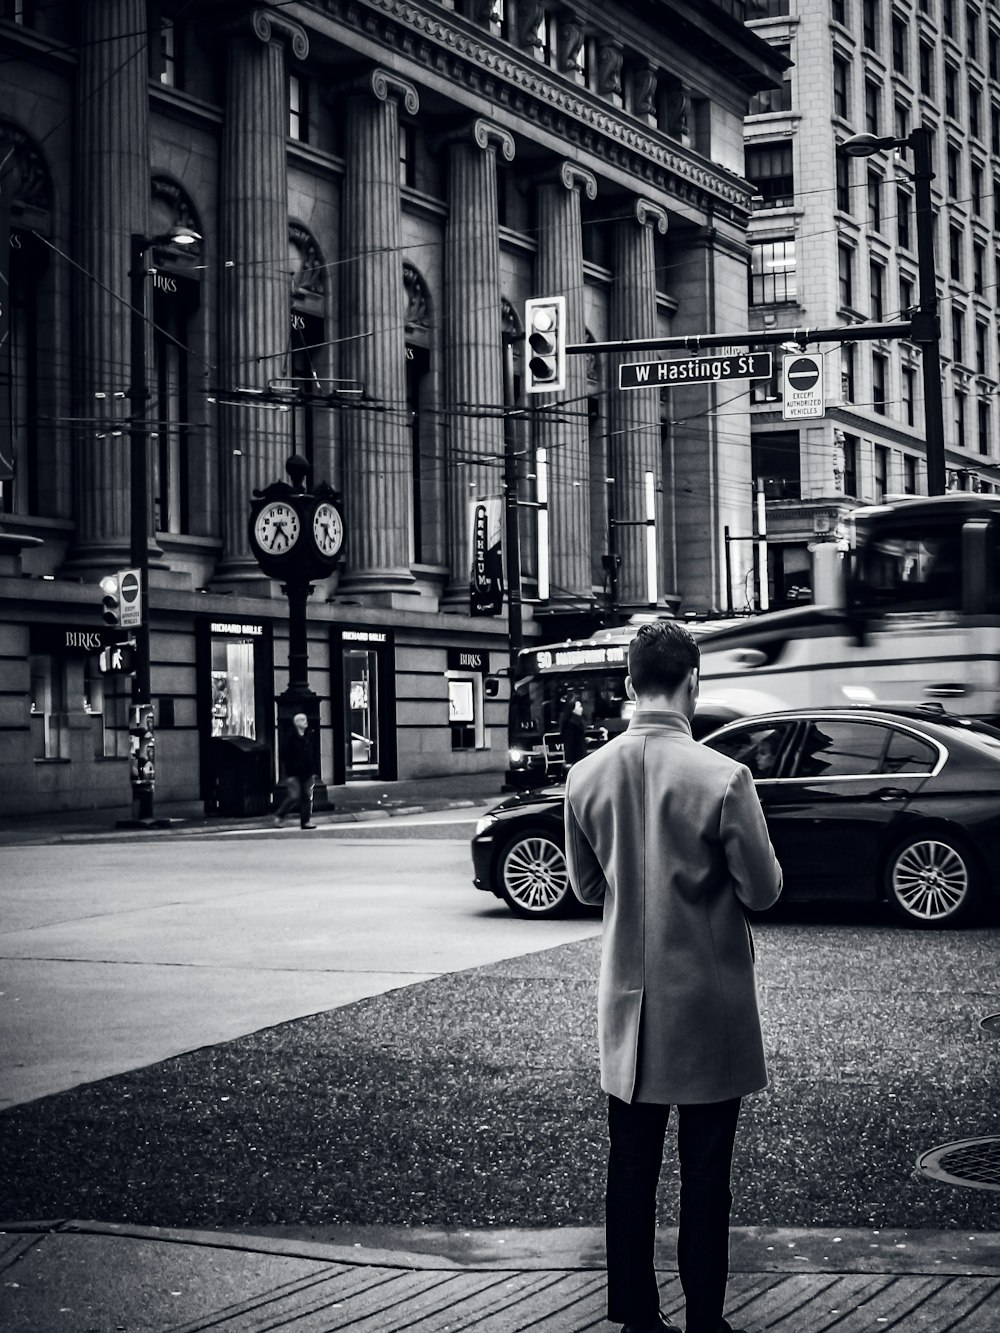 grayscale photo of woman in coat standing on sidewalk near cars and buildings